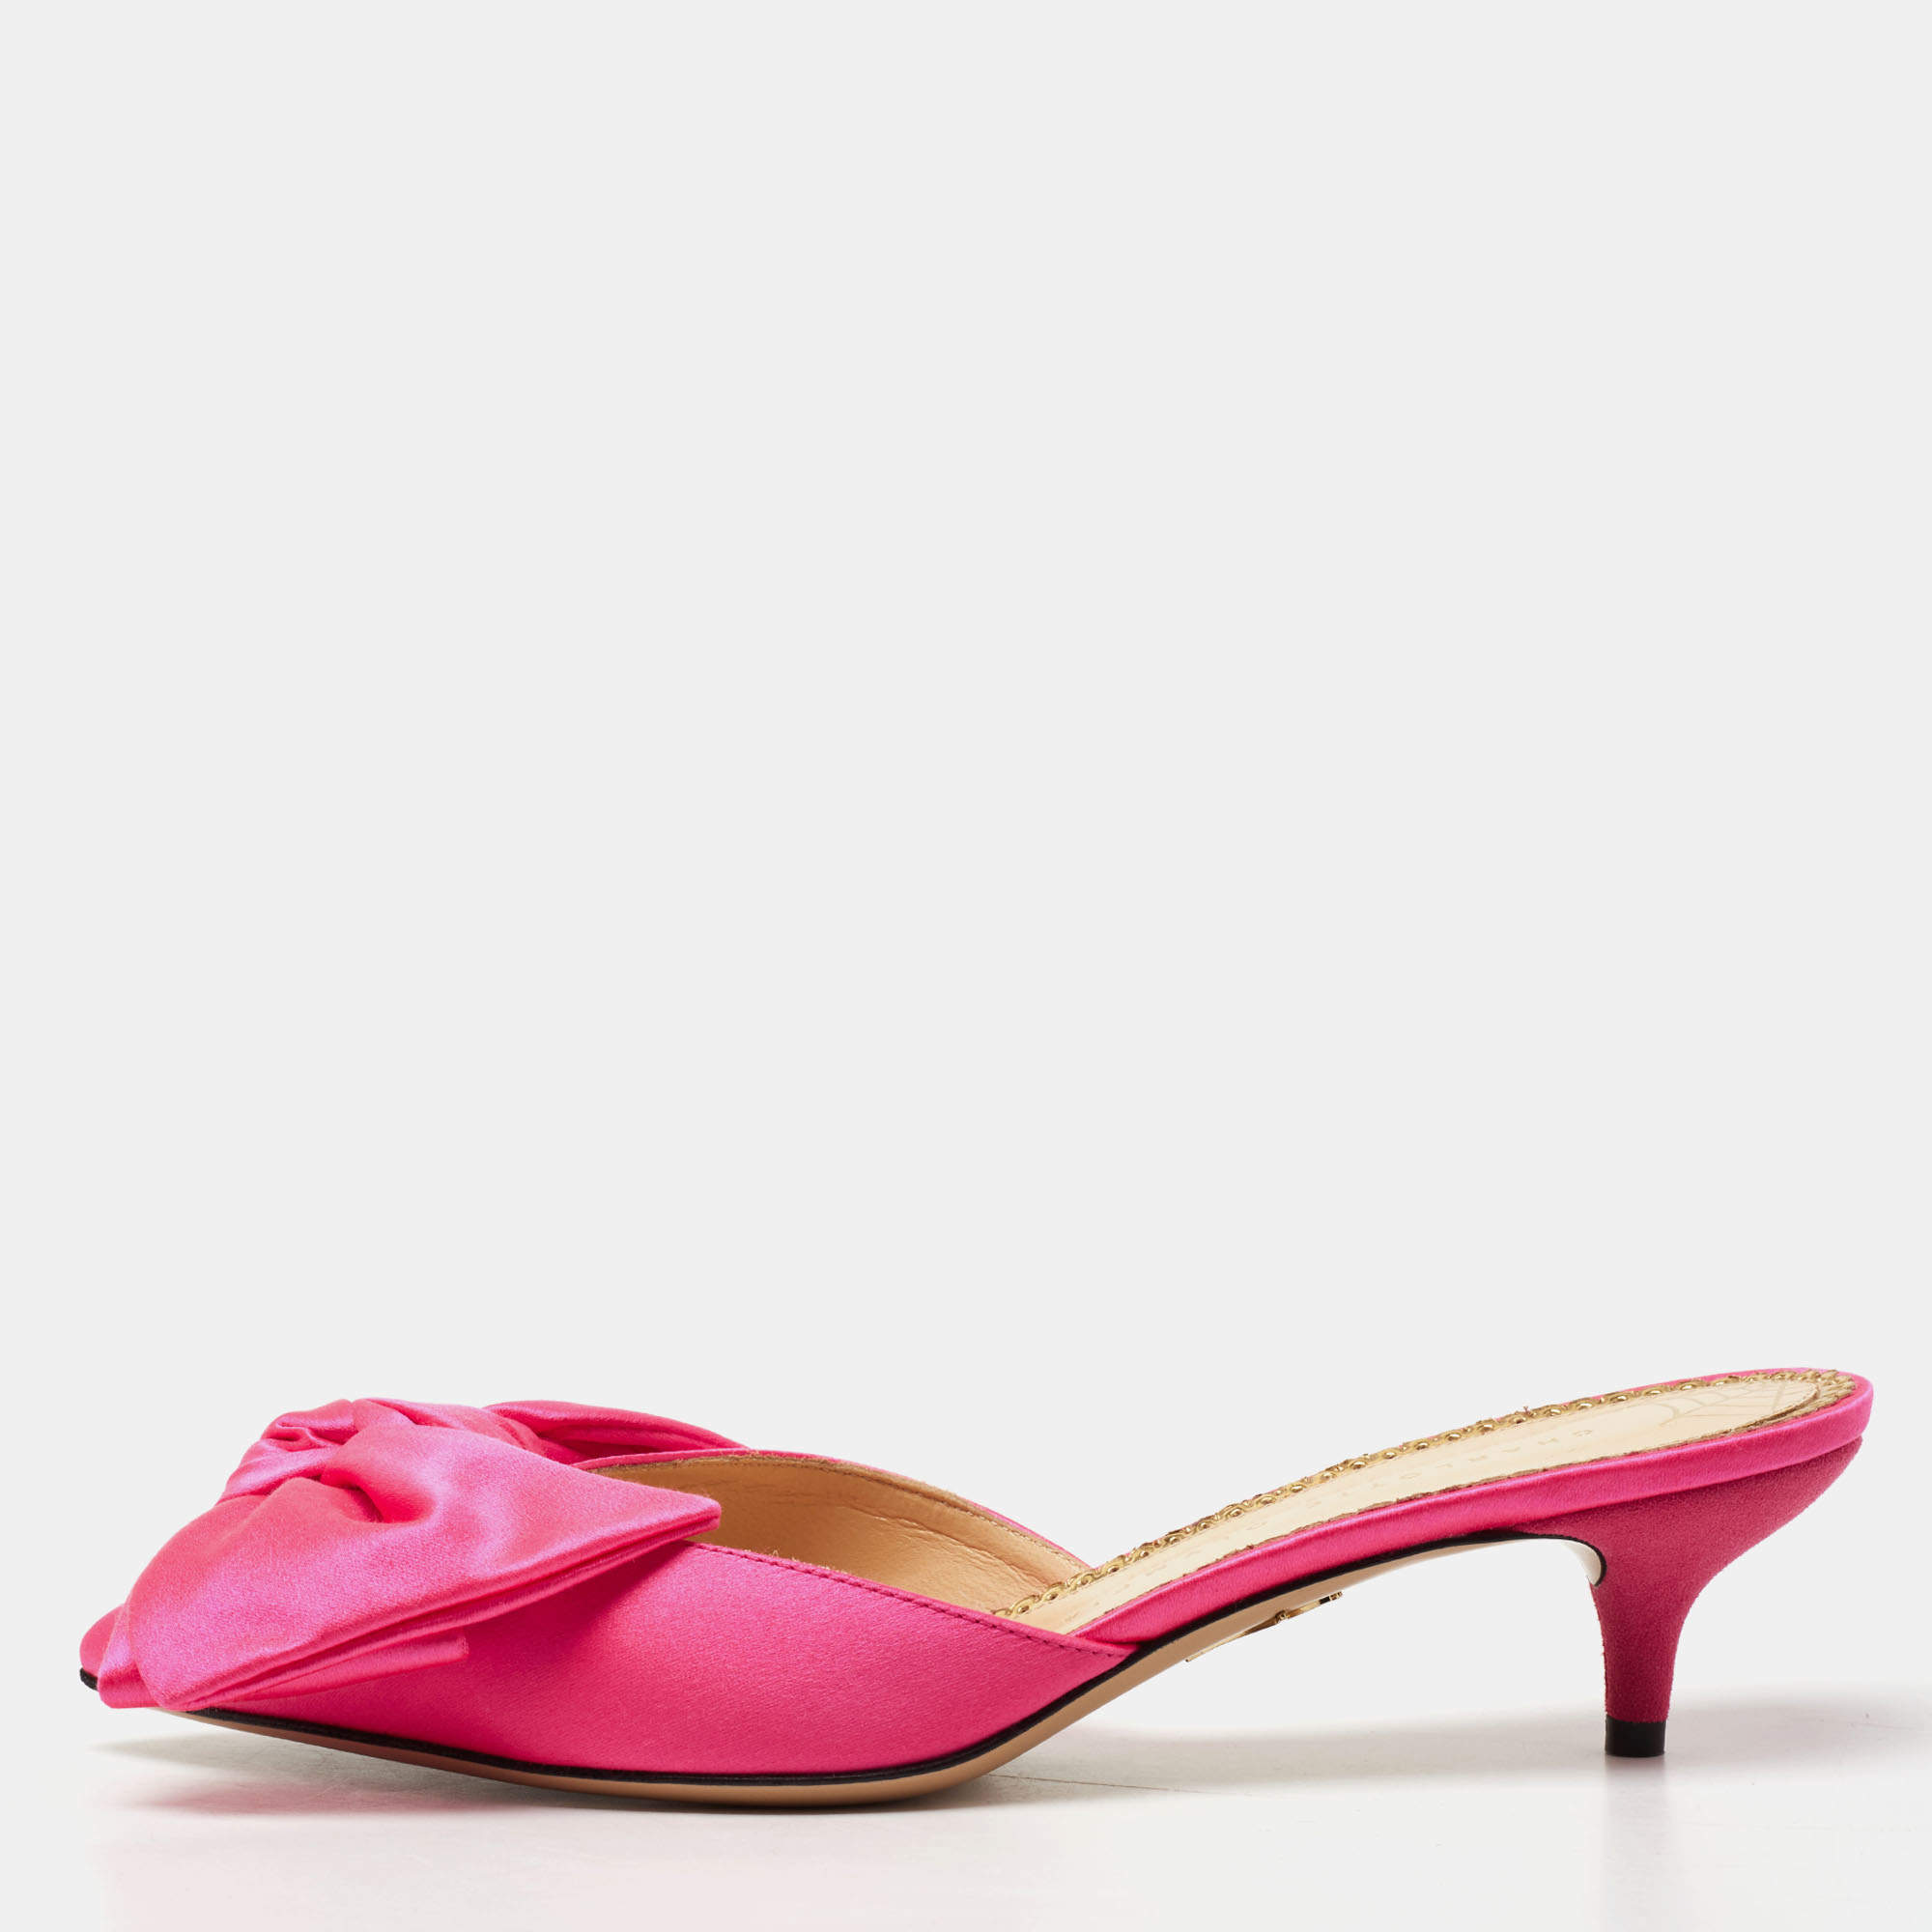 Charlotte Olympia Neon Pink Satin Sophie Mules Size 38.5